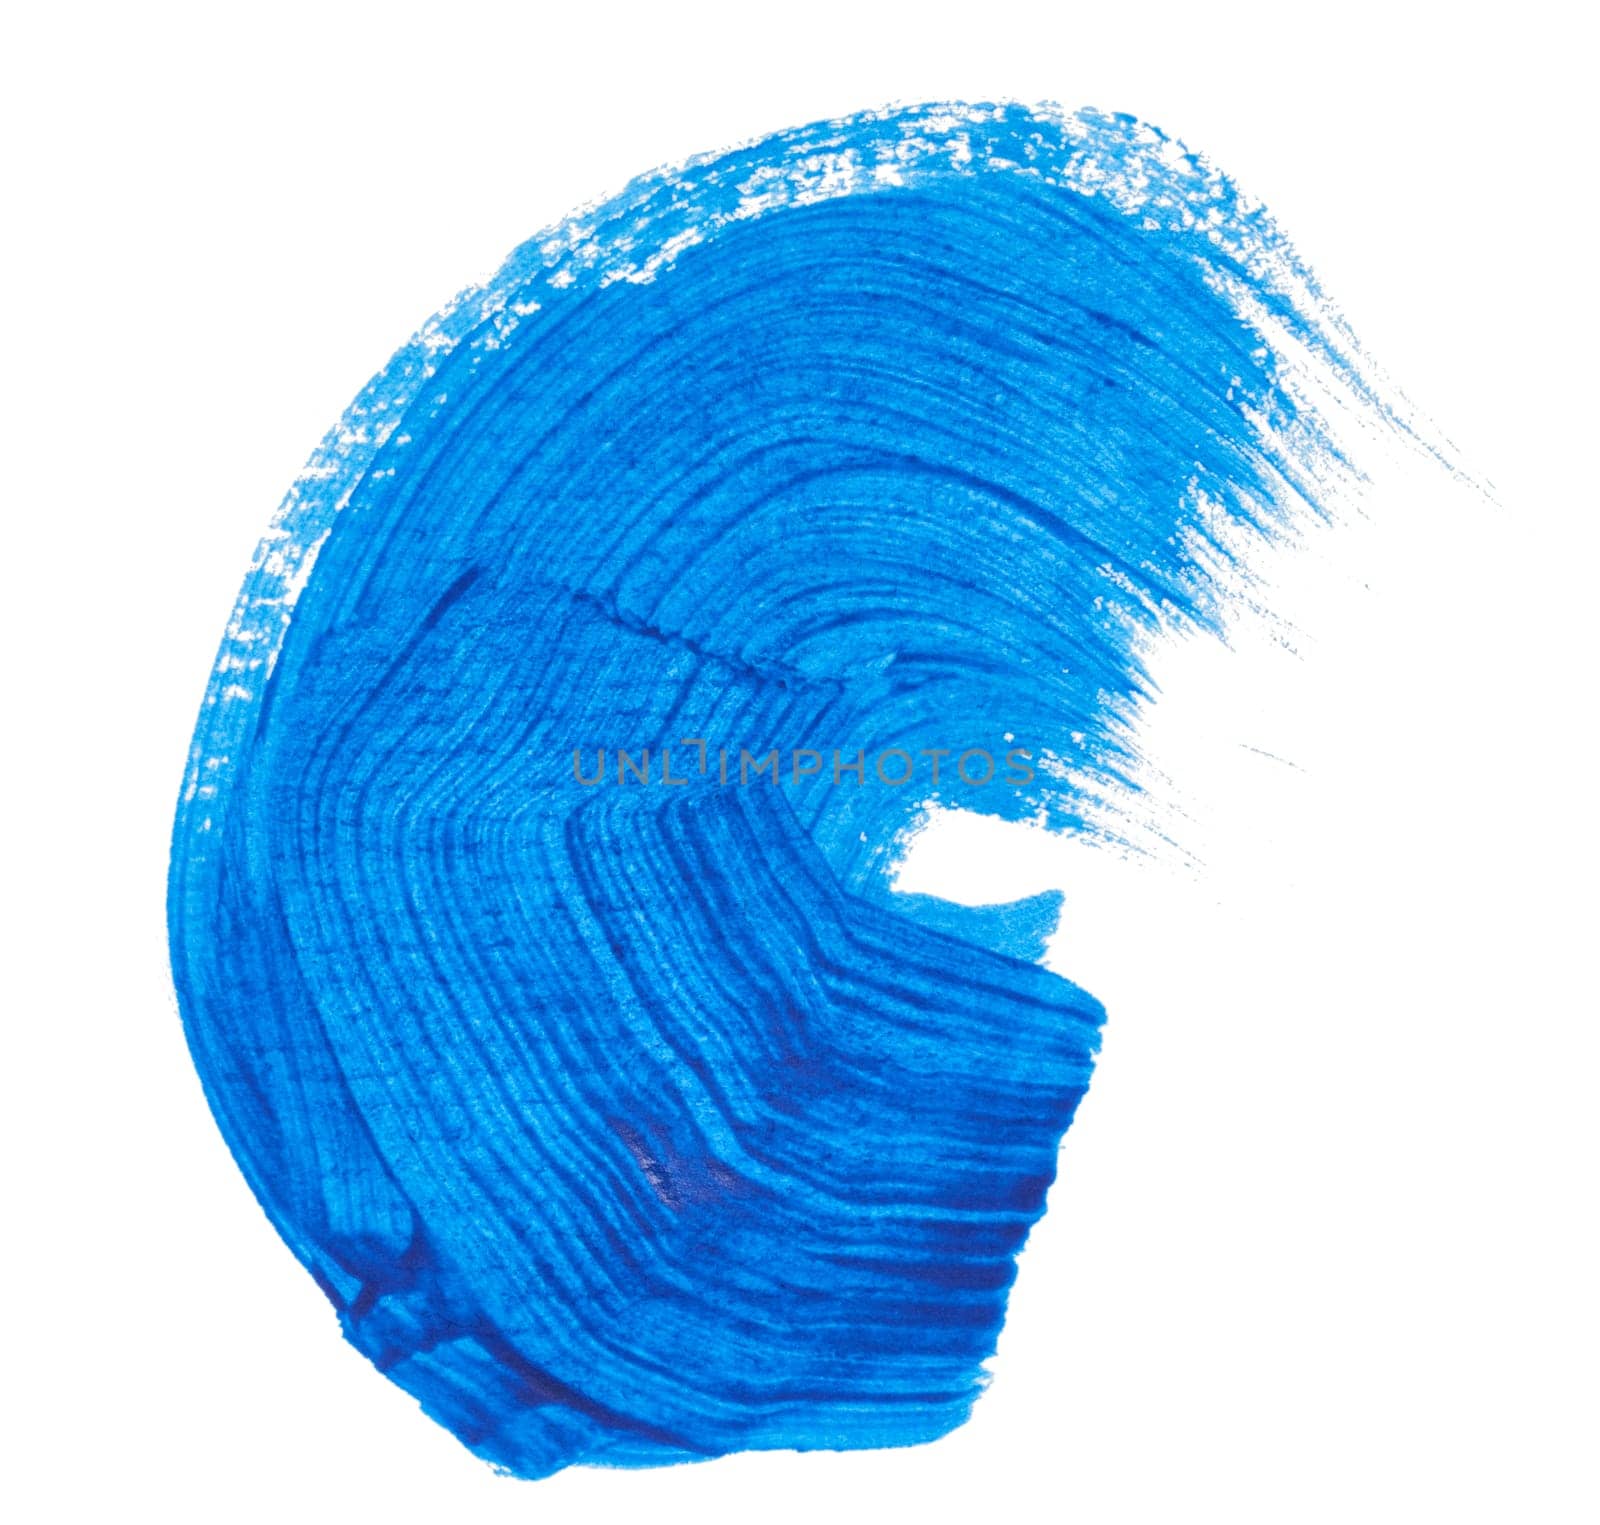 Watercolor brush stroke of blue paint on a white isolated background	 by ndanko